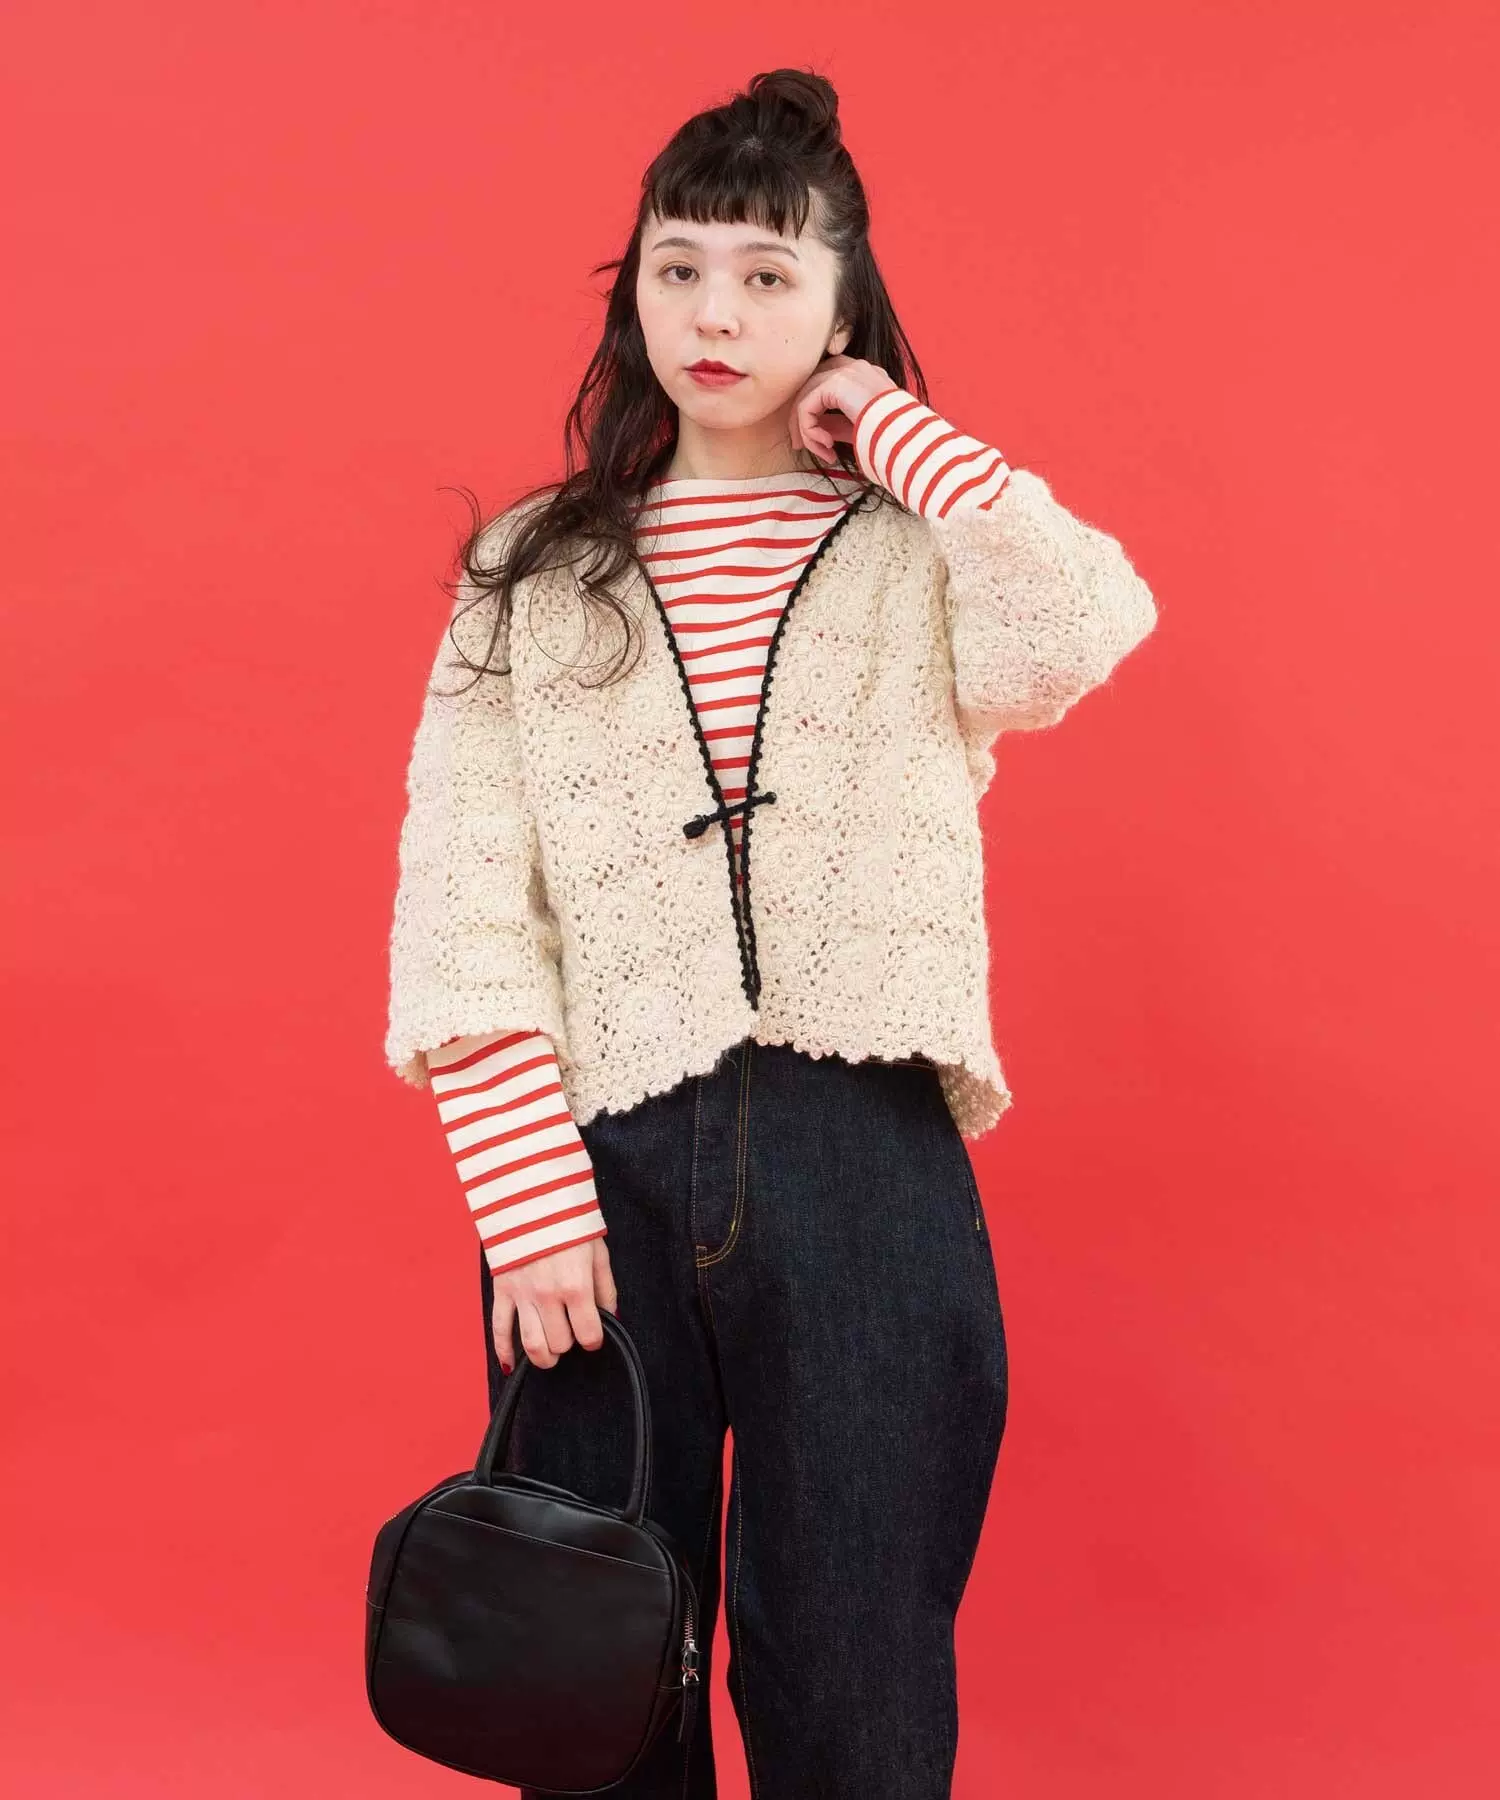 Dot and Stripes CHILD WOMAN 钩针短开衫外套1101KN001232-Taobao